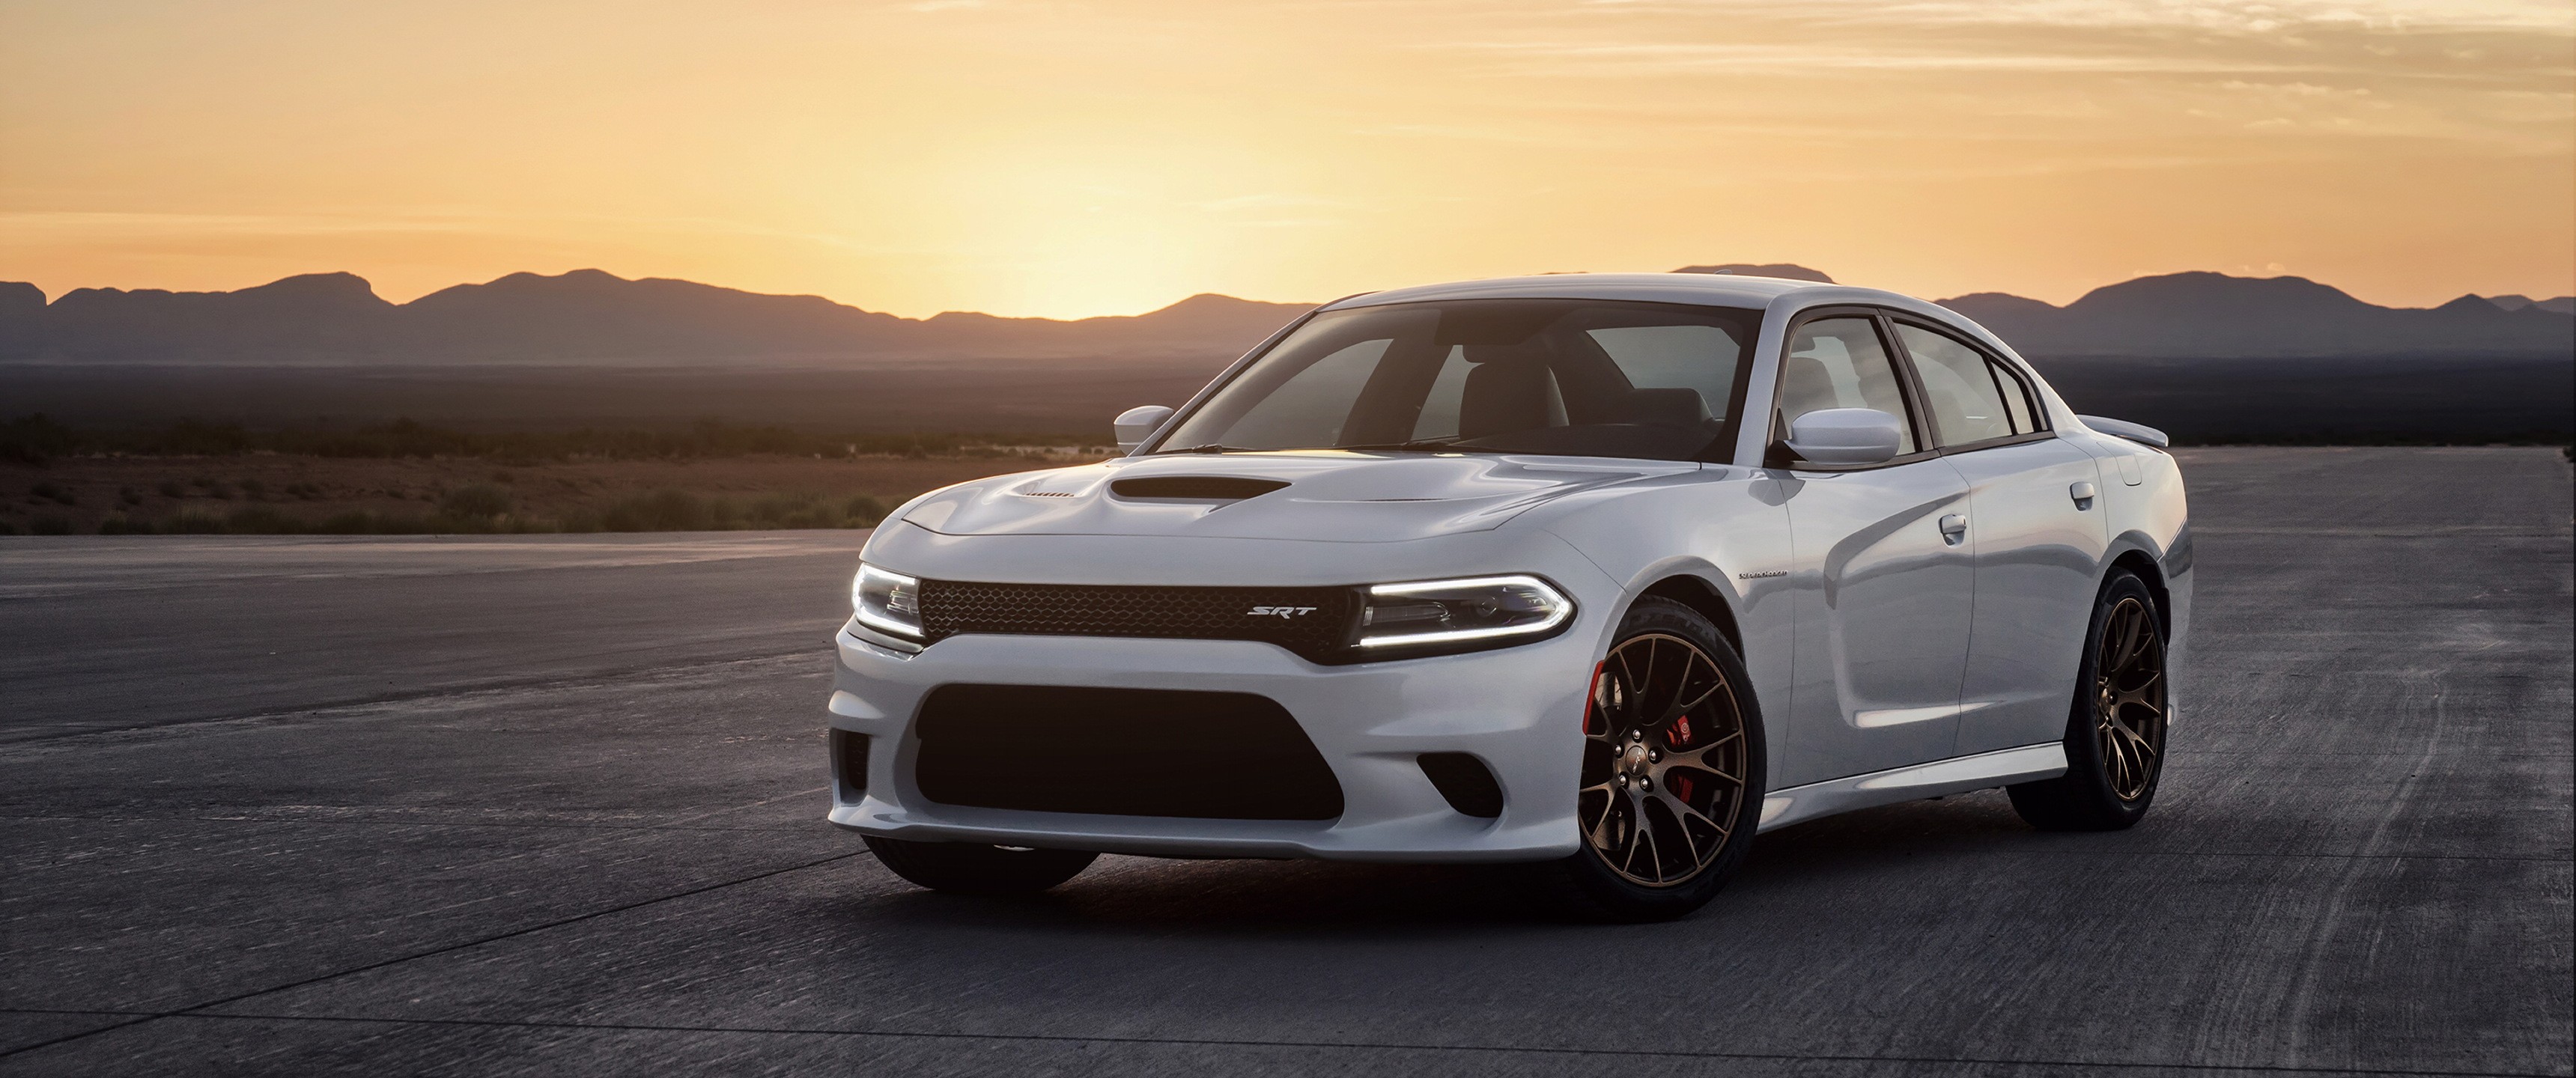 dodge charger cool